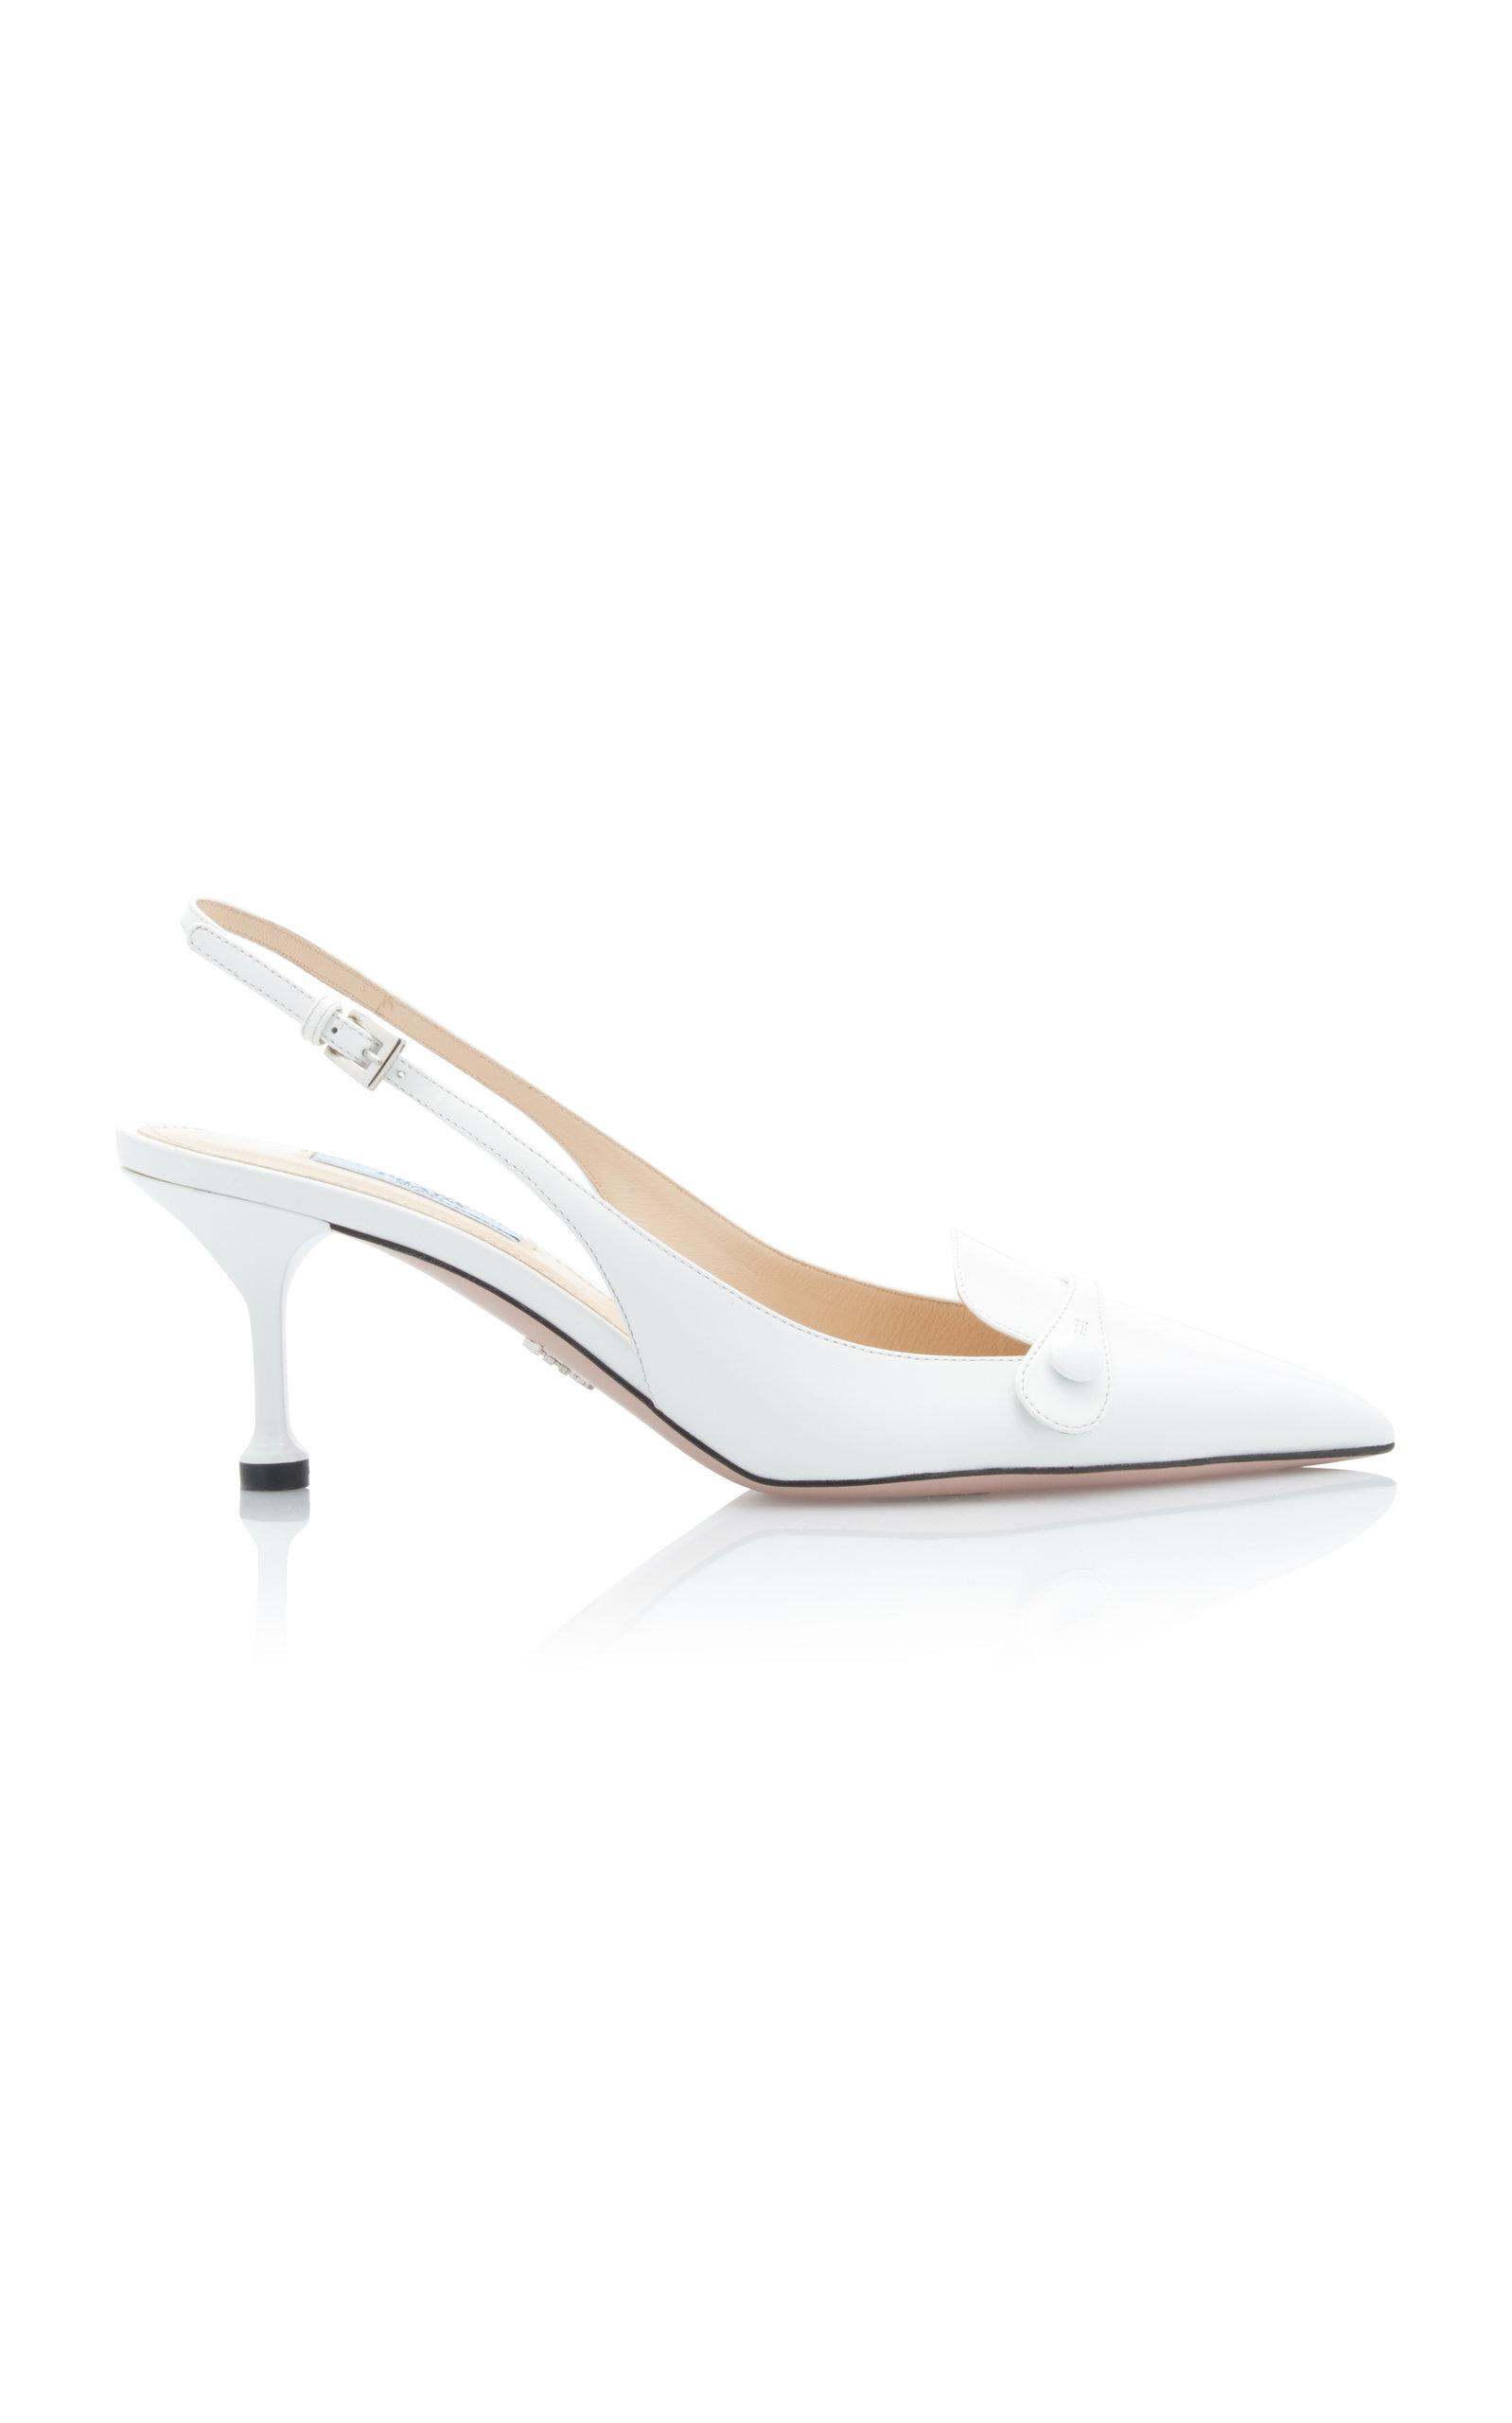 WHITE OUT: Get a handle on @prada's sleek silhouettes. Adding an